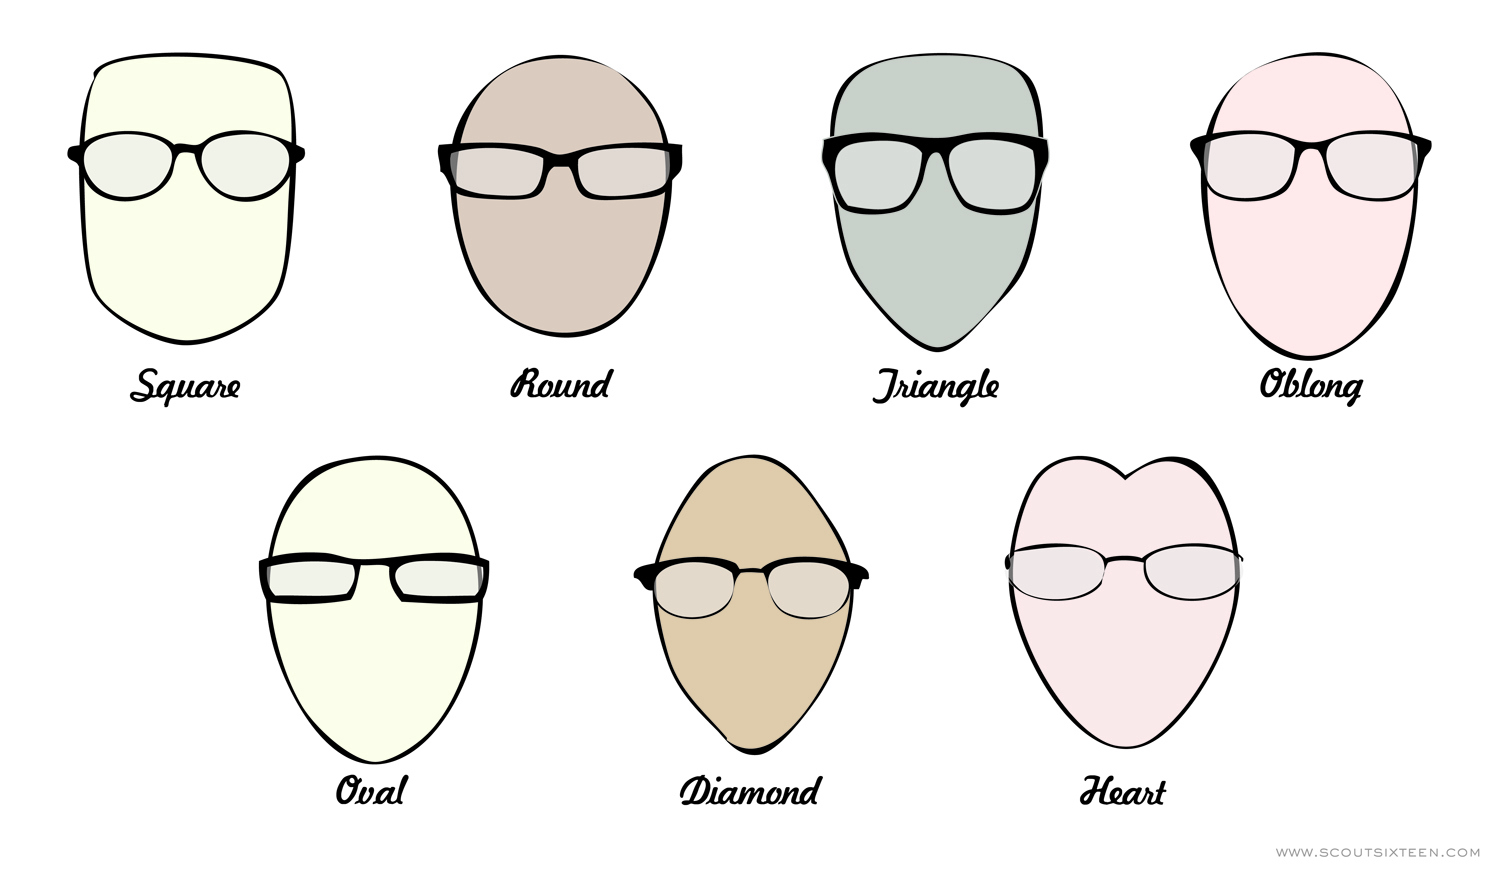 3. "How to Choose the Perfect Eyeglass Frames for Your Blonde Hair" - wide 5